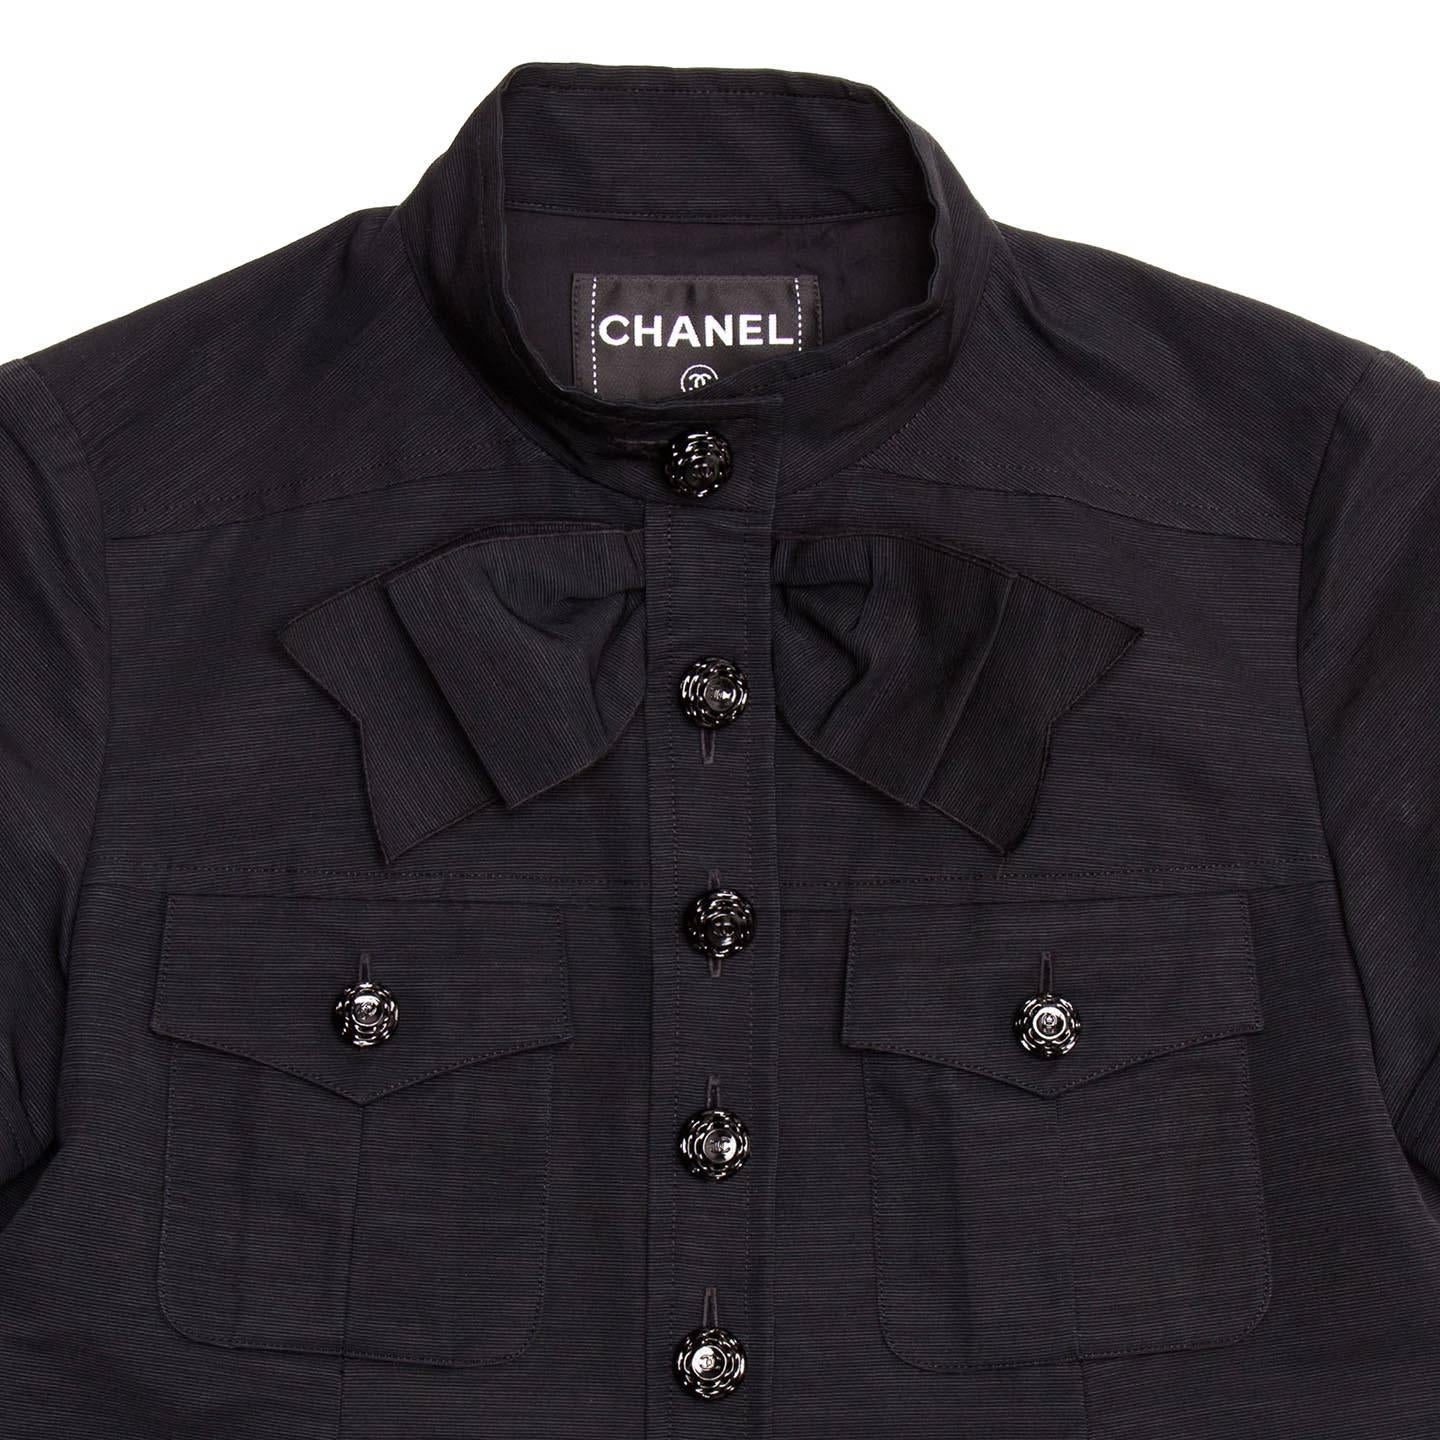 Chanel Black Cotton Shirt Jacket Style With Bow Detail For Sale 1